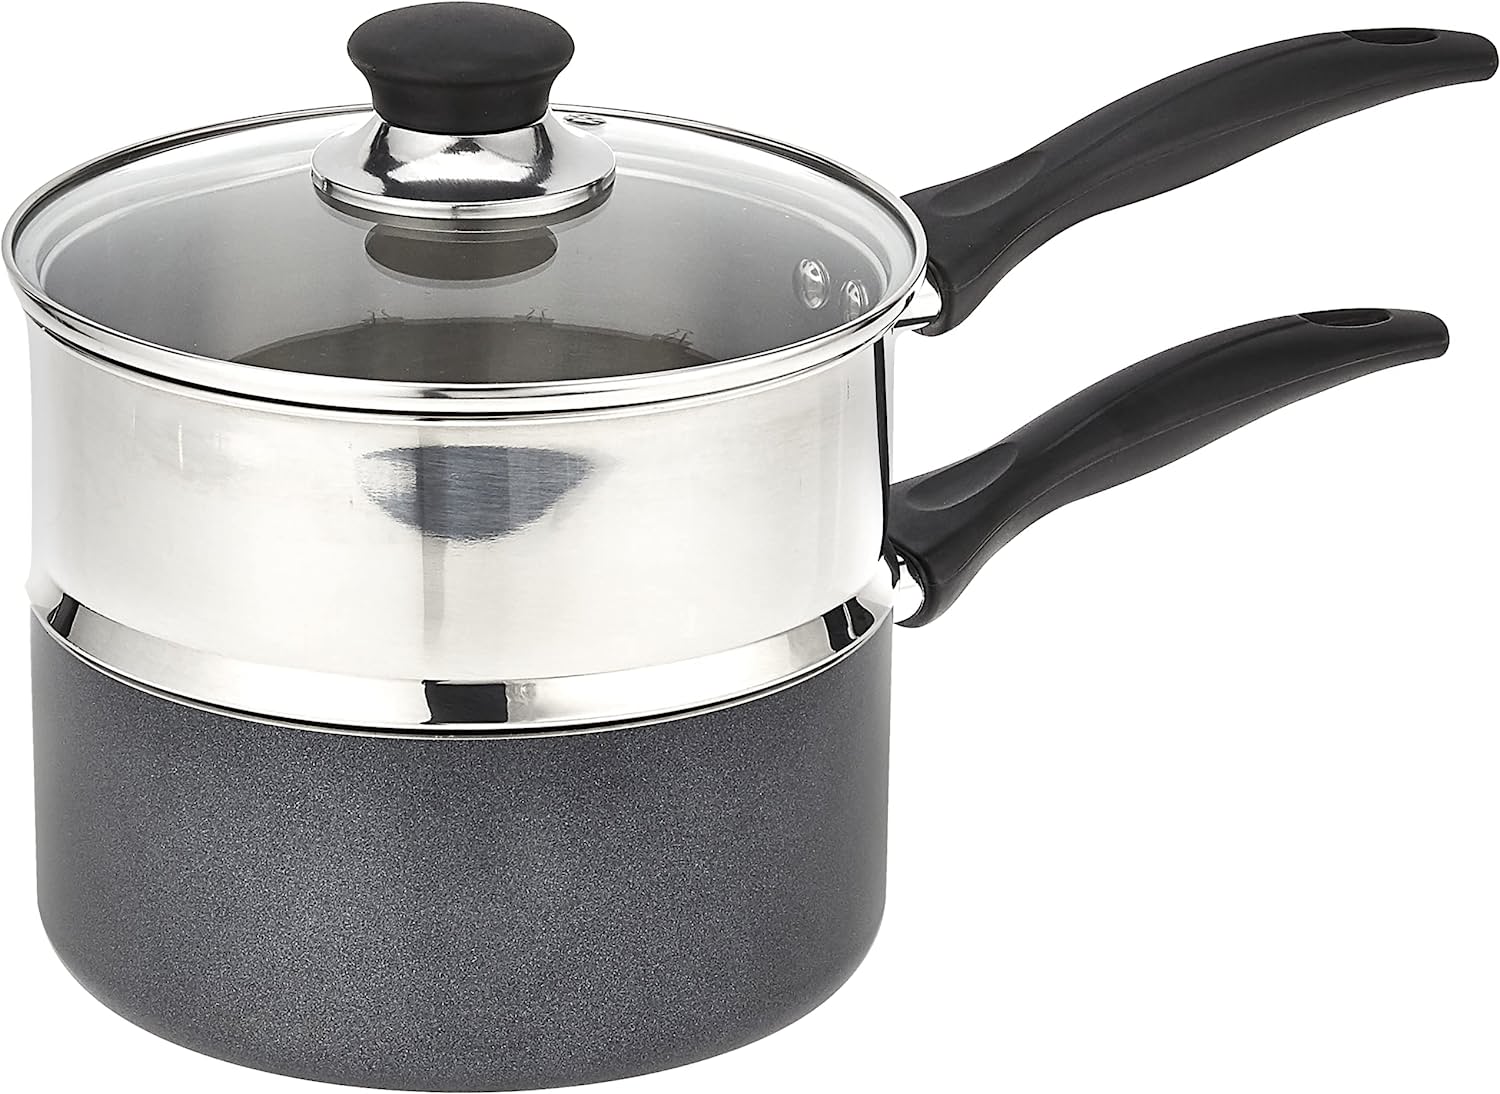 680M Double Boiler Pot Set,0.7QT Chocolate Melting Pot and 1600ML/1.7QT  Stainless Steel Pot,Insert Melting Pot with Heat Resistant Handle for